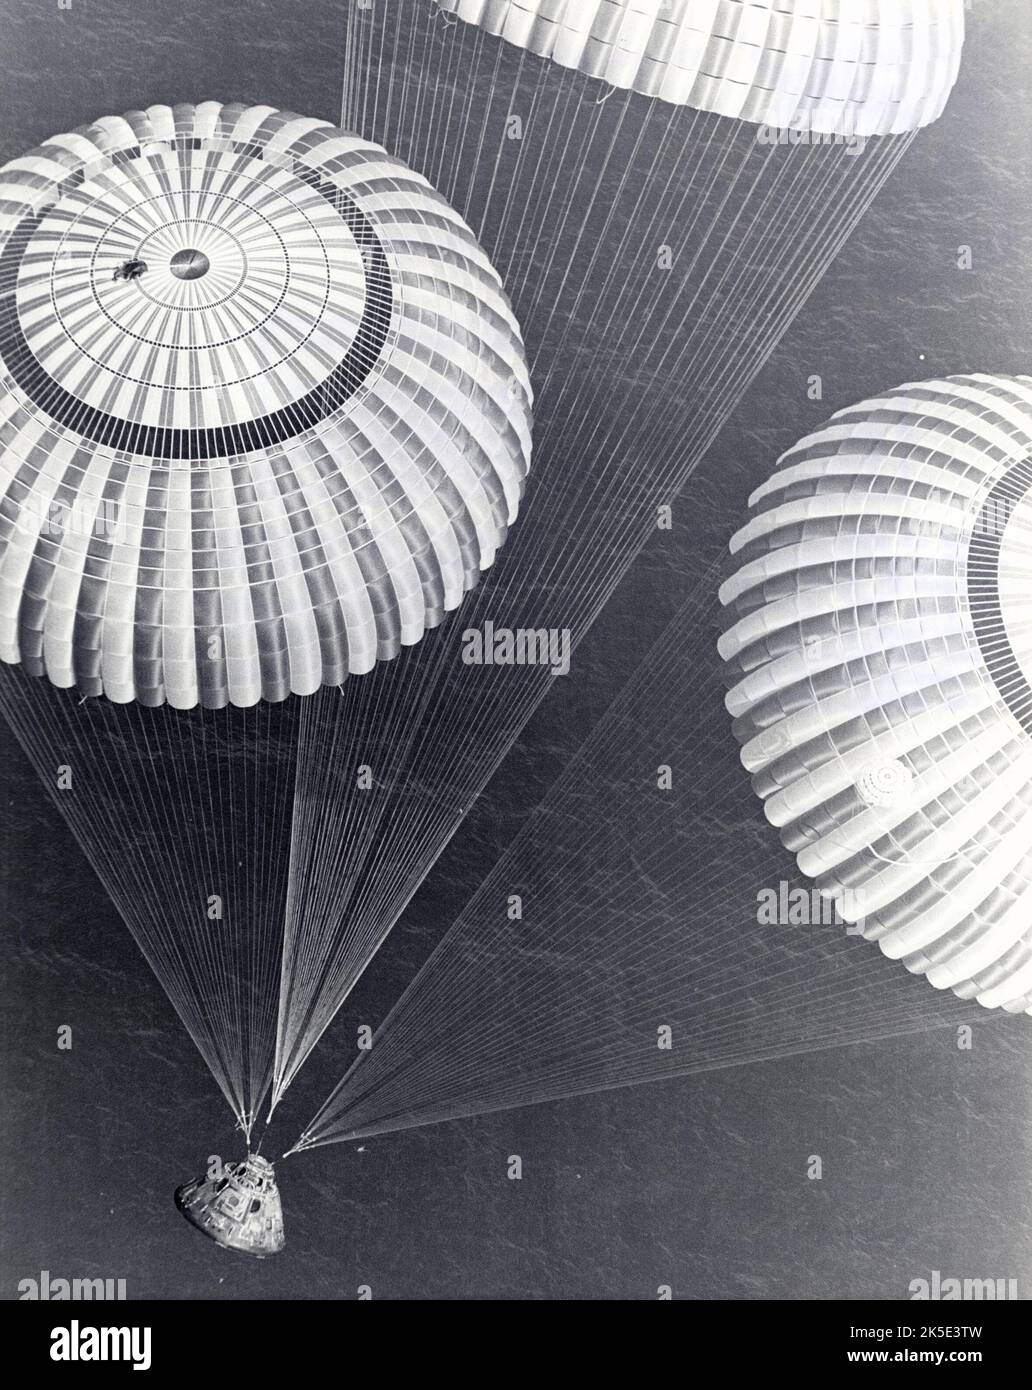 Apollo 17 Splashdown. The Apollo 17 capsule and crew splashed down at 14:25 EST on 19 December 1972. The mission marked the longest Apollo mission, 504 hours, and the longest lunar surface stay time, 75 hours, which allowed the astronauts to conduct extensive geological investigations. They collected 257 pounds (117 kilograms) of lunar samples. Credit: NASA Stock Photo